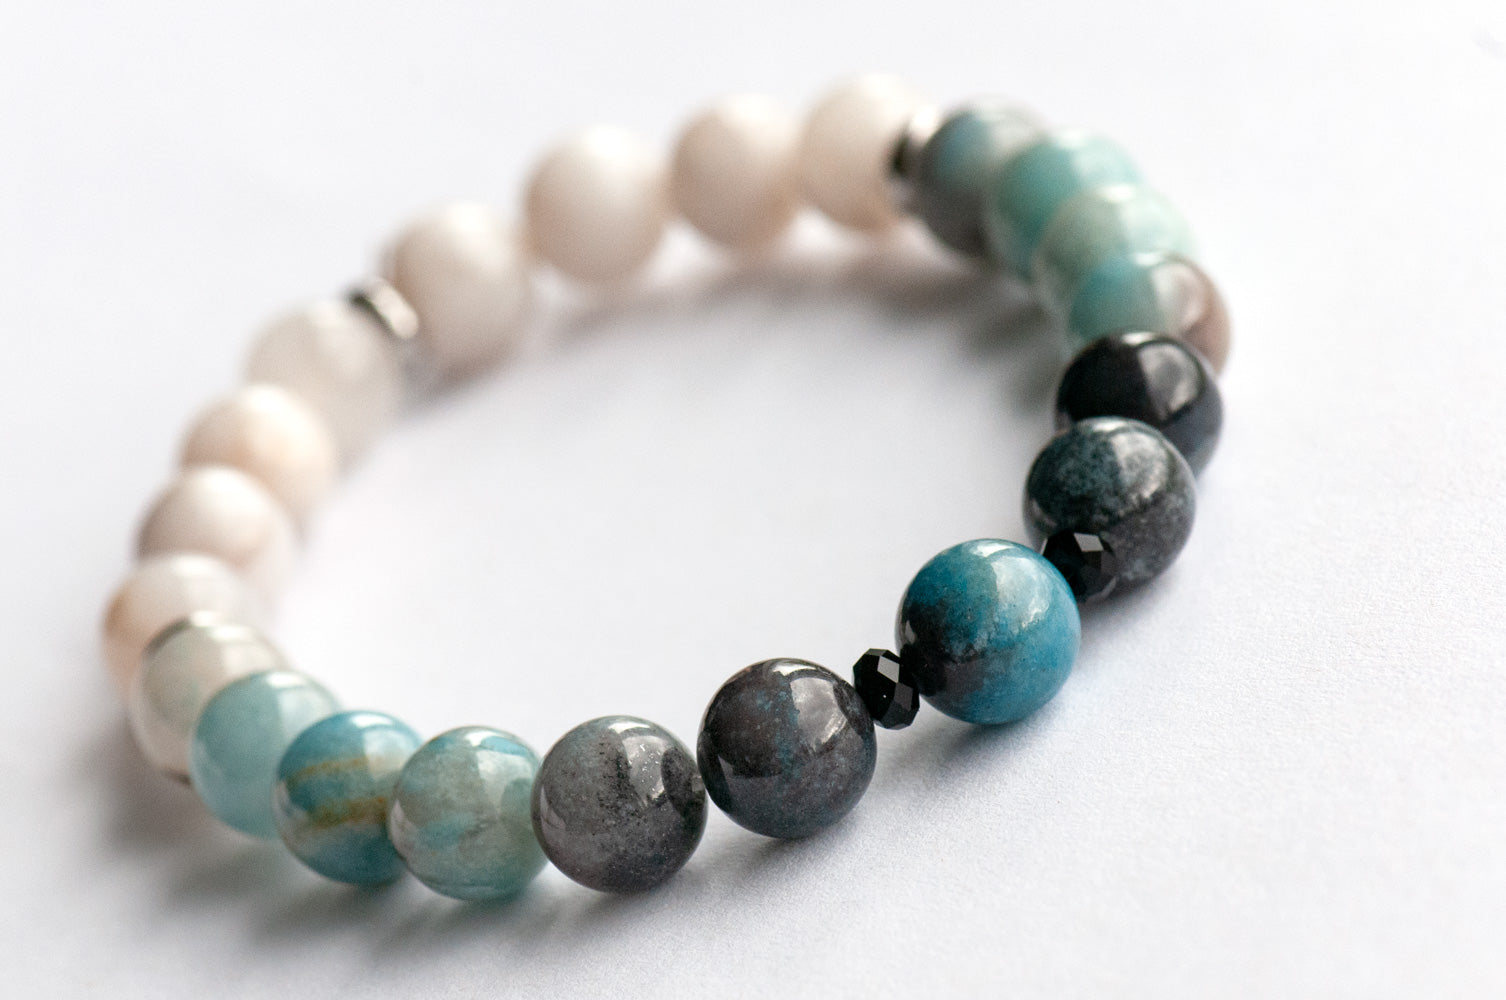 Single strand blue ombre Trolleite bracelet with black onyx accent beads and white Jade, handmade in New Brunswick Canada